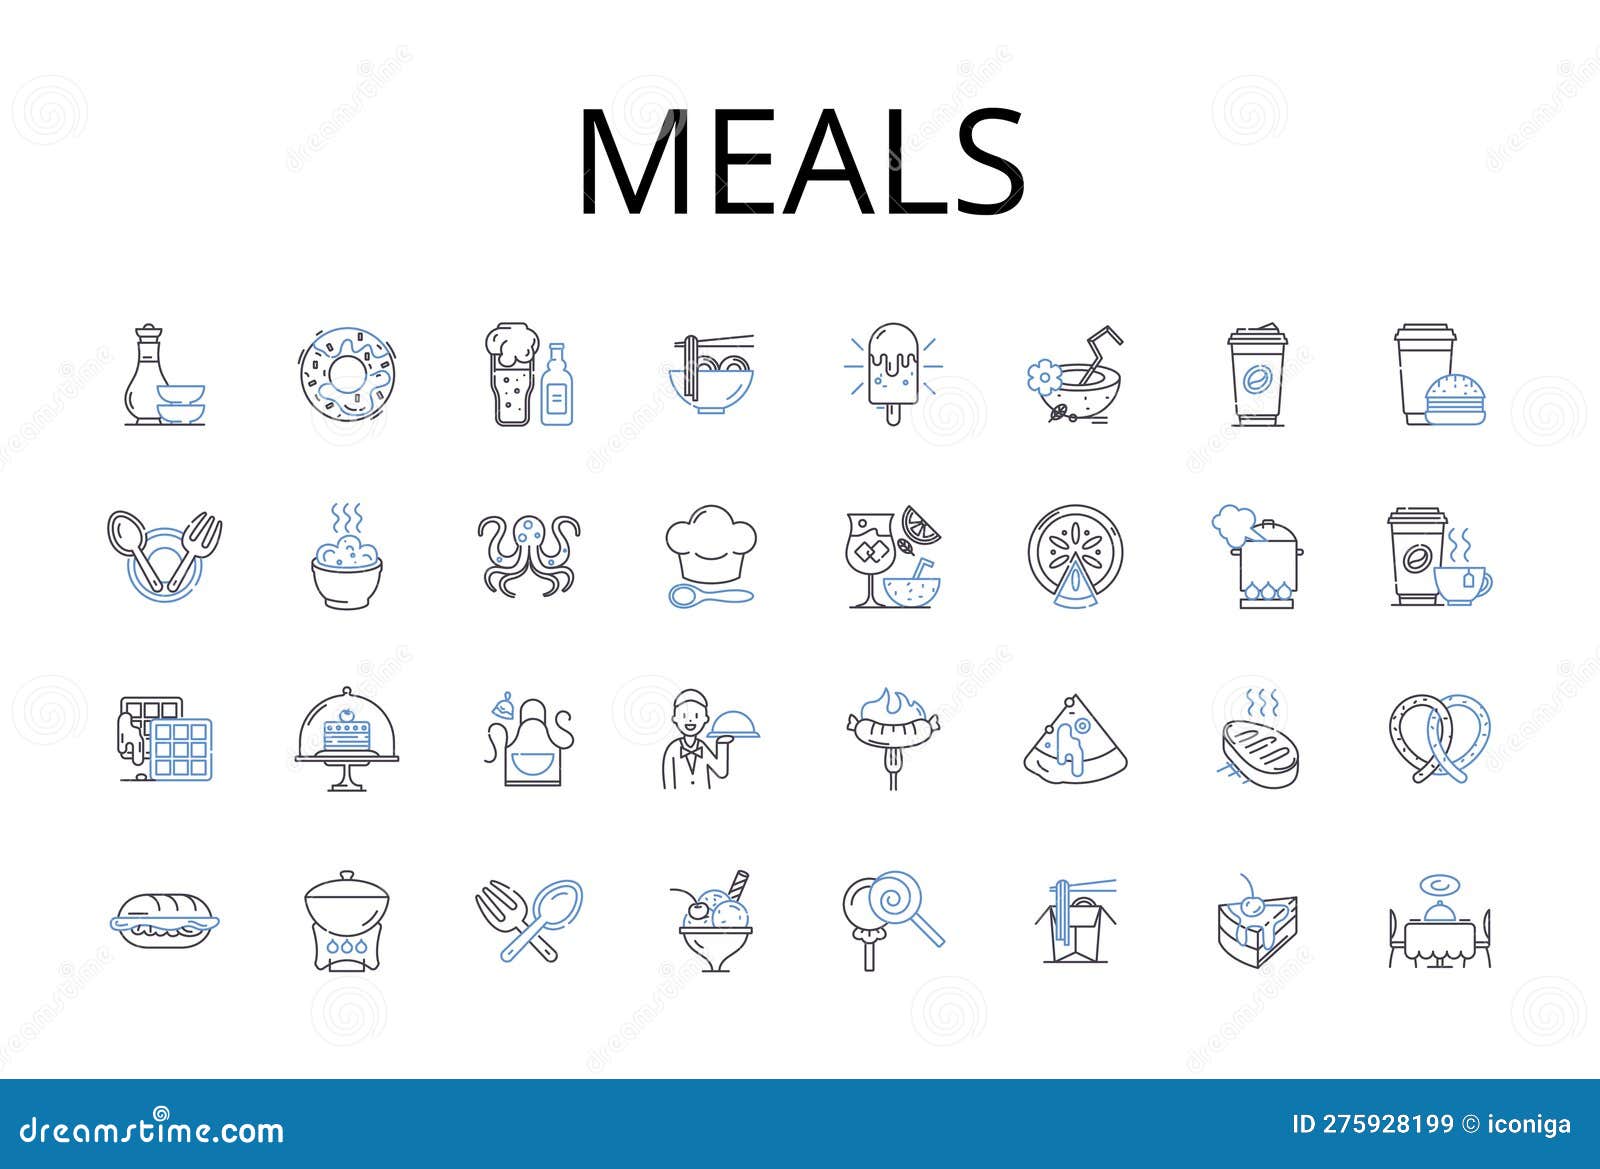 meals line icons collection. foodstuffs, grub, comestibles, cuisine, fare, victuals, provisions  and linear